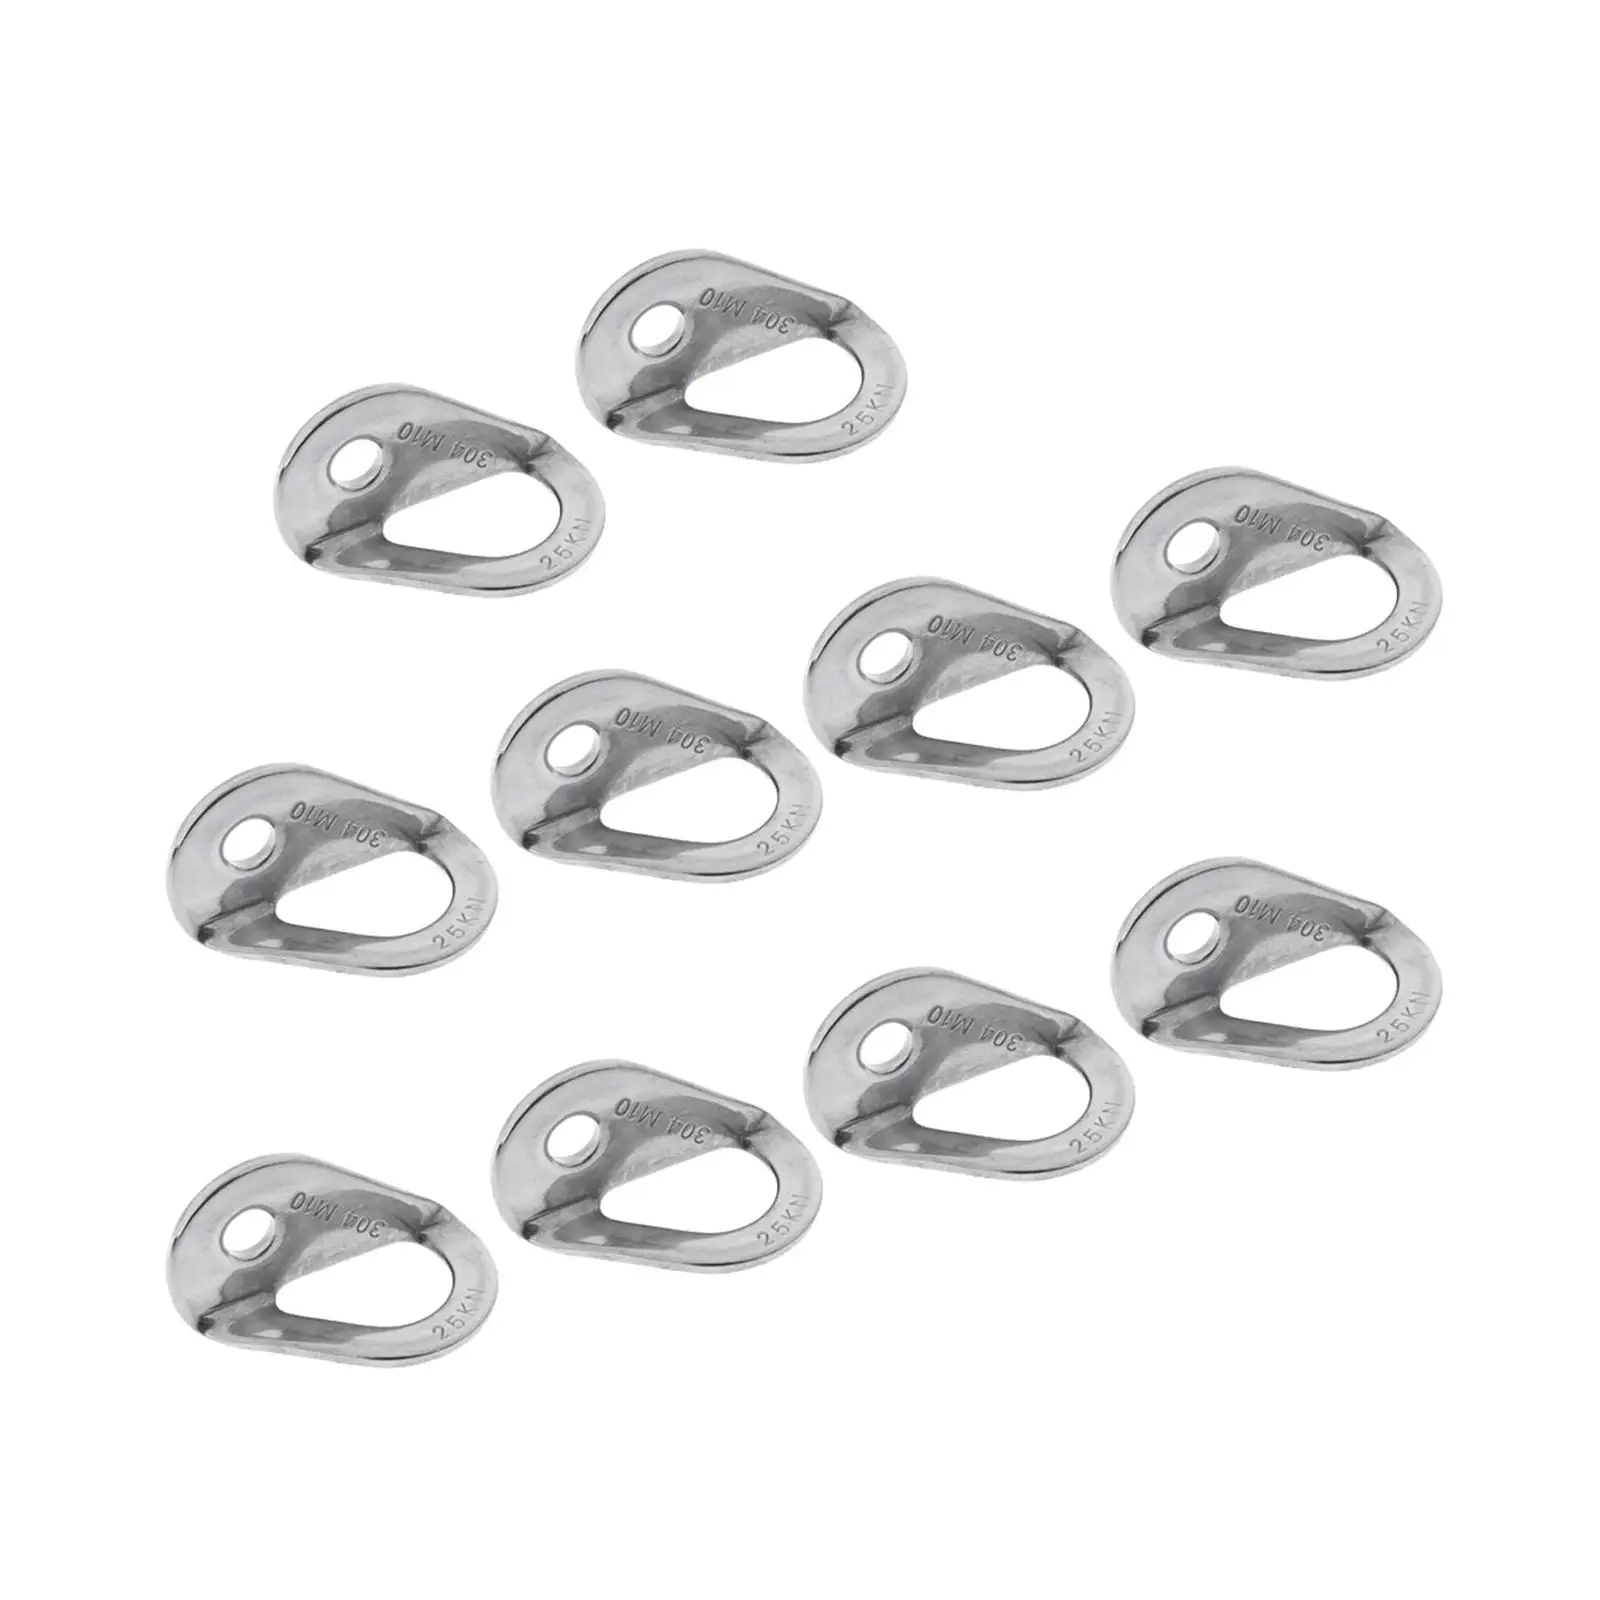 10 Pieces Climbing Anchor Point Nail Hanger Anchor Protection Anchor Plate for Outdoor Belay Engineering Hiking Mountaineering